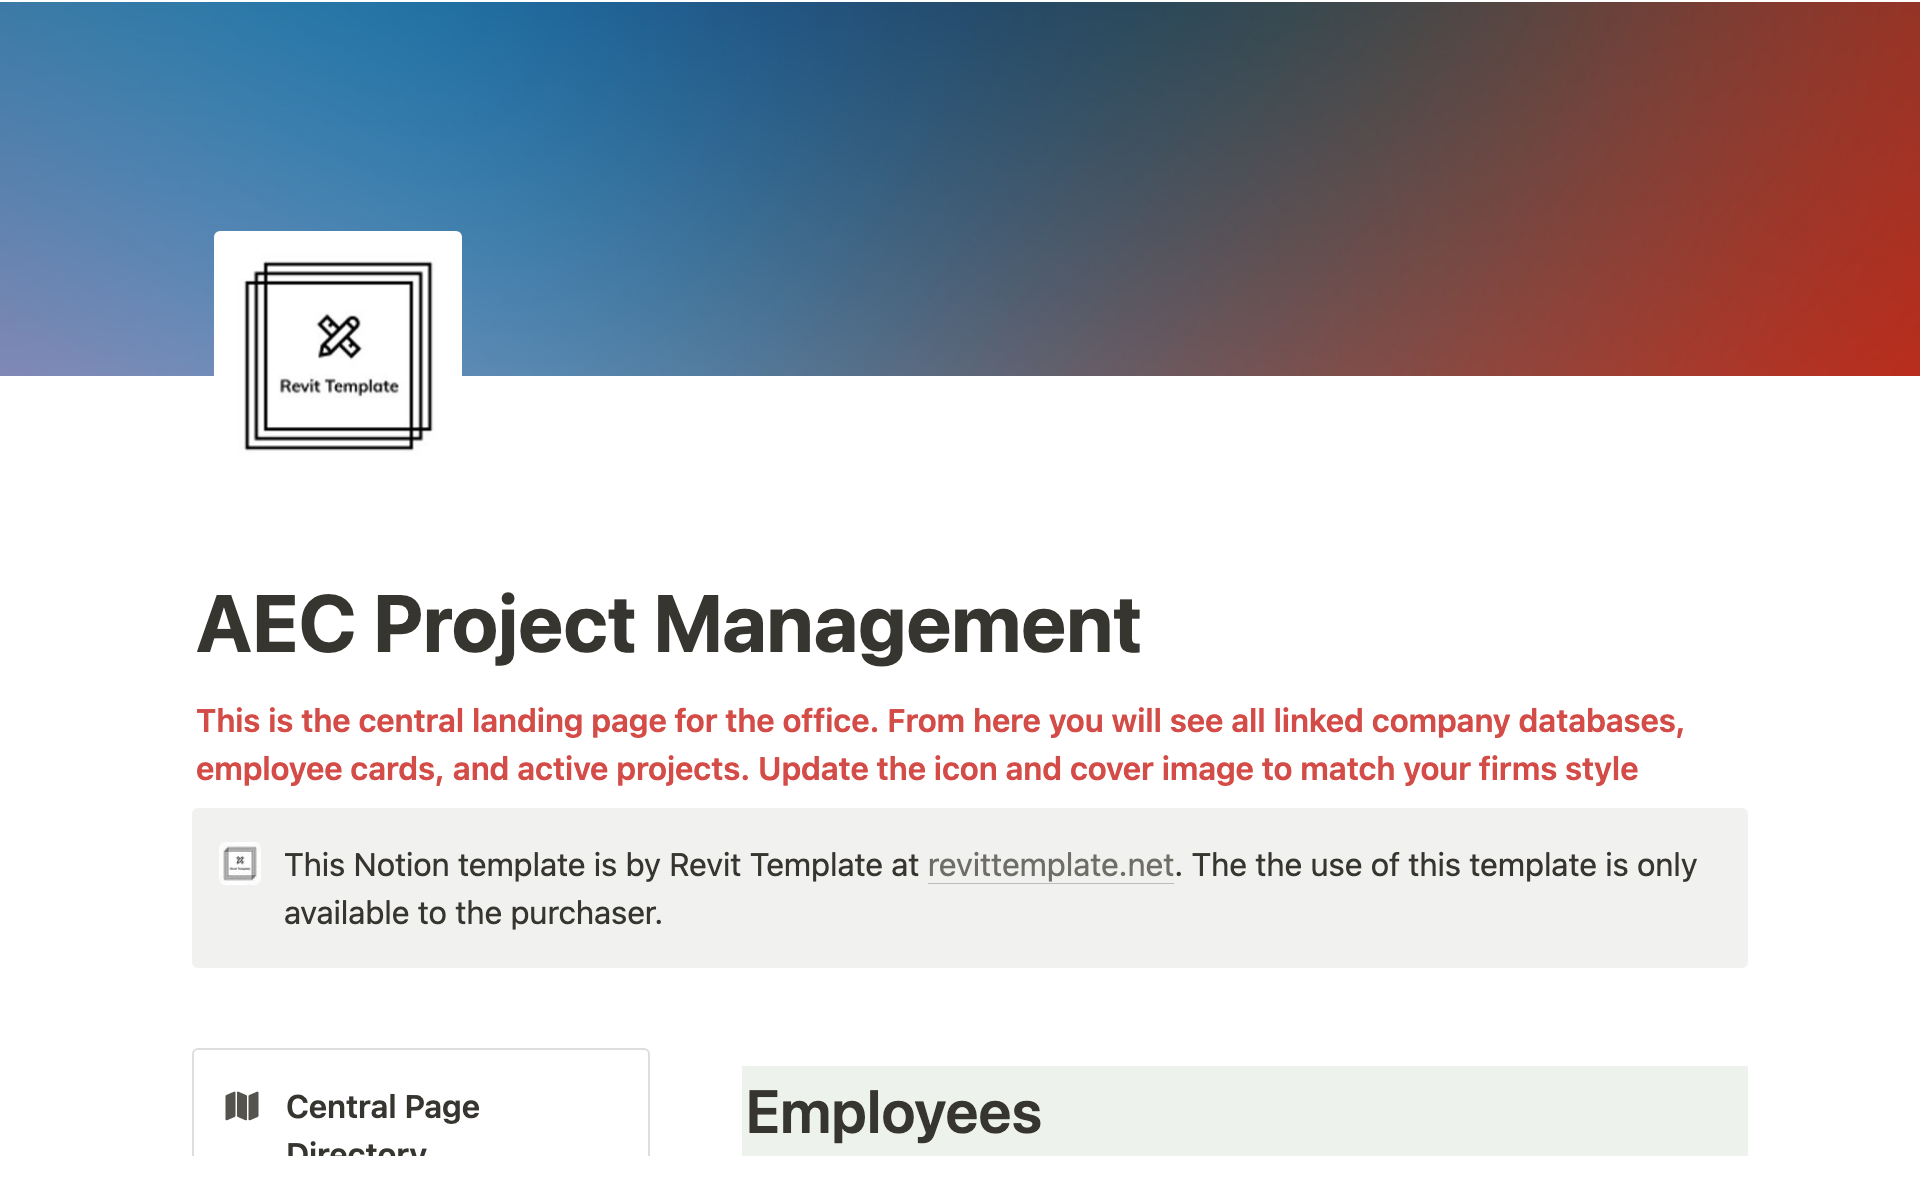 The AEC project management template was developed specifically by us to simplify and unify projects and company wide information and workflows into one platform as a single authoritative source.